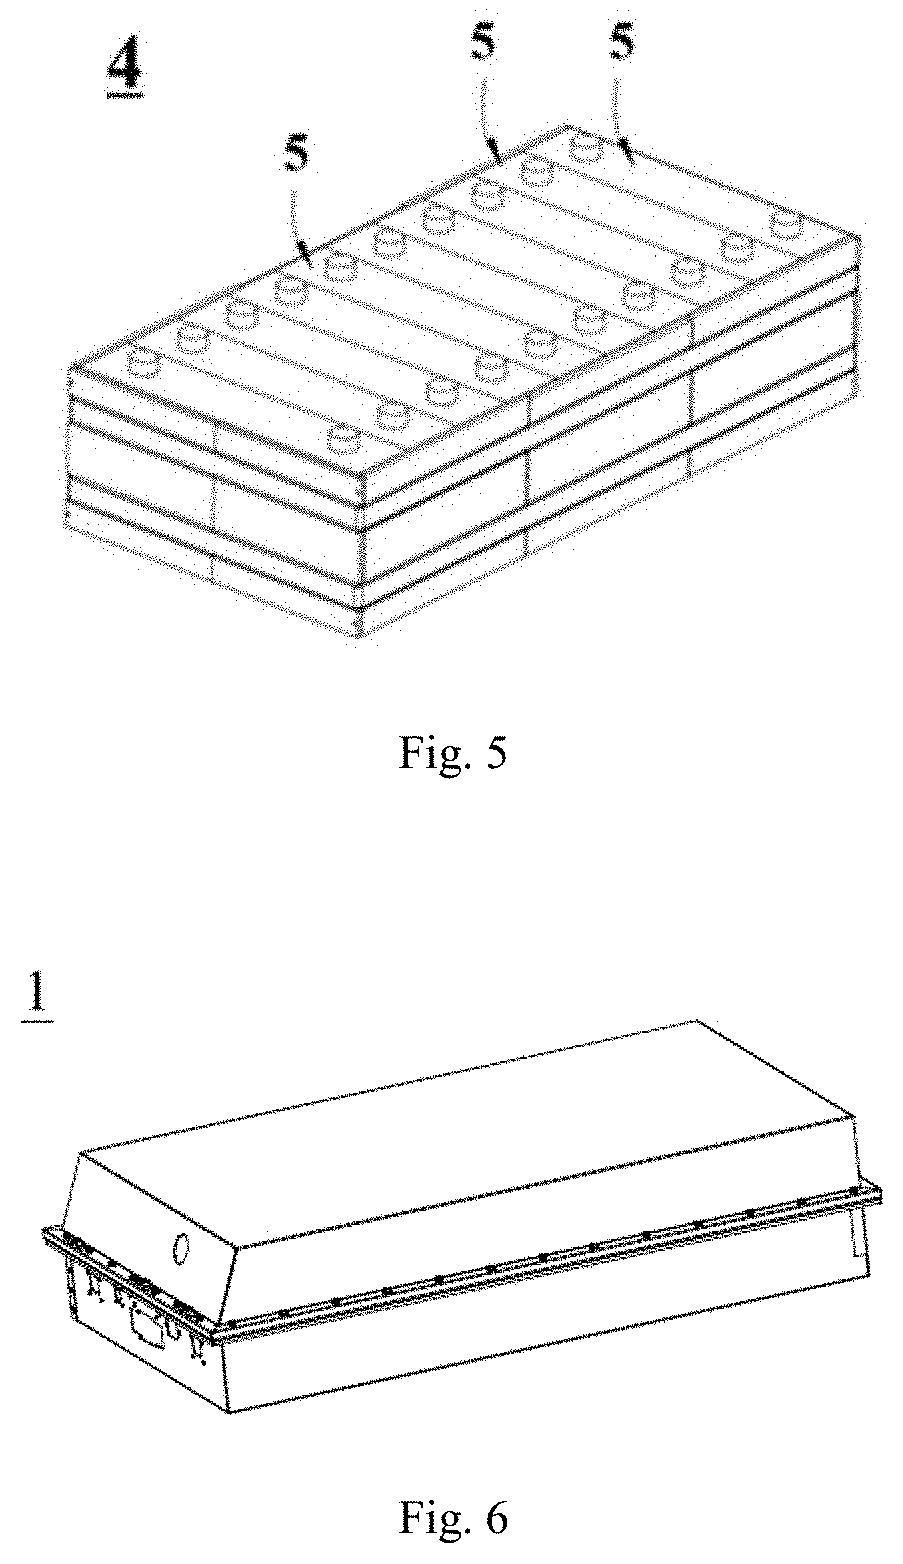 Negative electrode active material, process for preparing the same, and battery, battery module, battery pack and apparatus related to the same